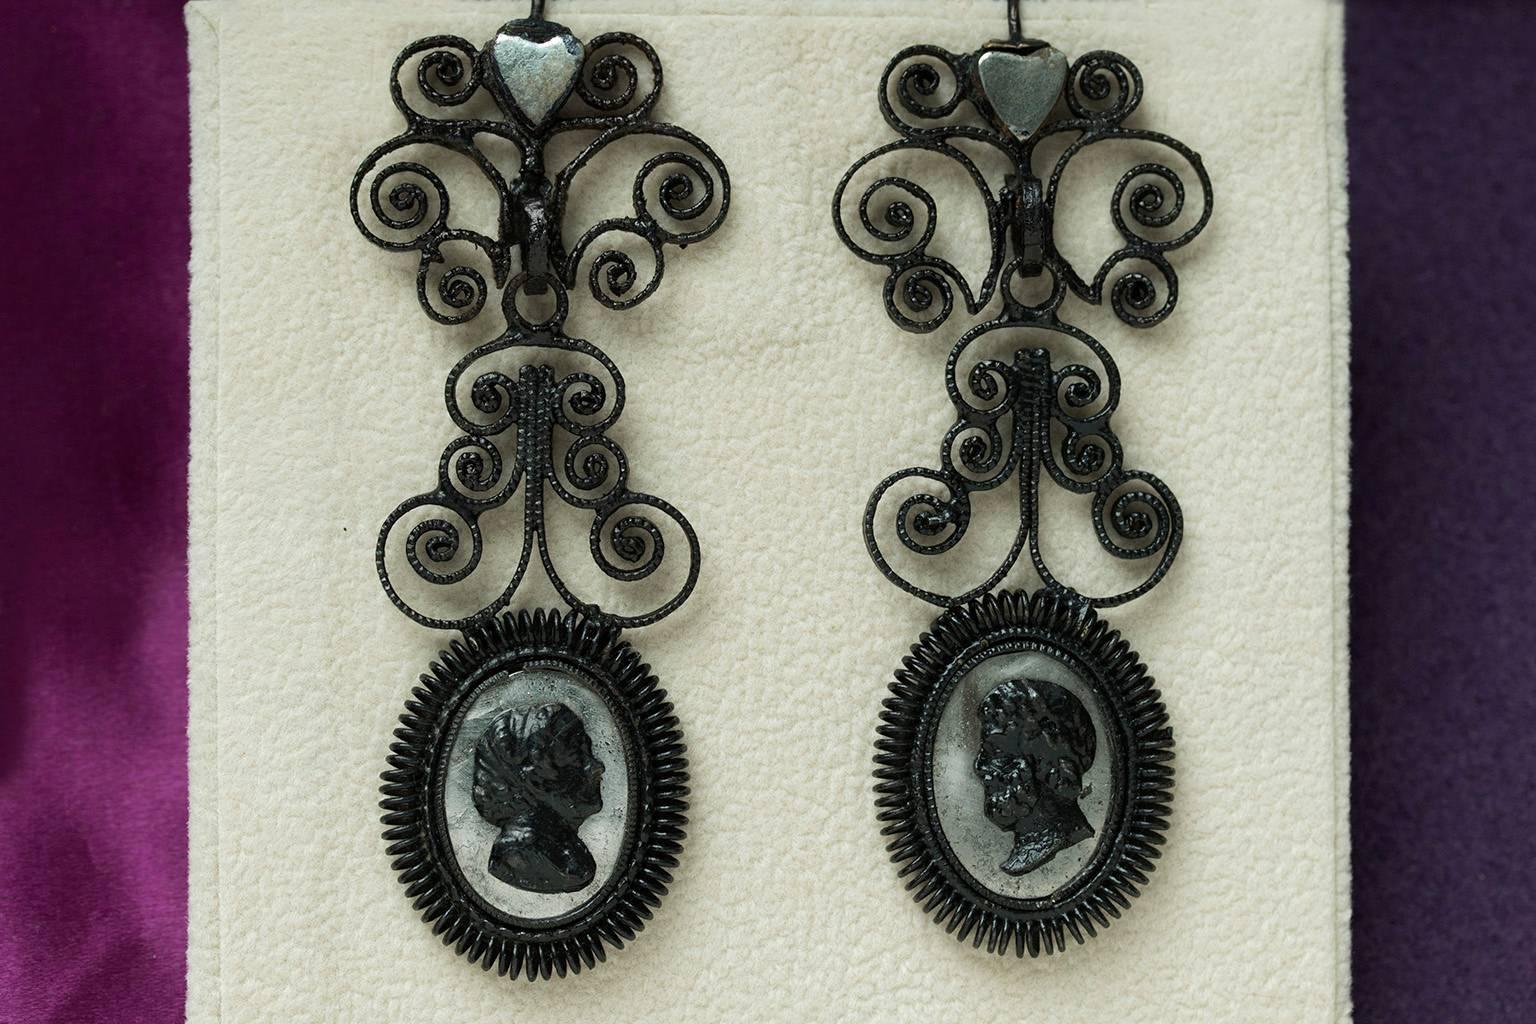 A stunning pair of early 19th century Berlin iron earrings. 

Berlin iron jewelry was developed in Germany in 1806. The jewelry was created to support the fight against Napoleon I in the Prussian war of Liberation (1813-1815). Citizens donated gold